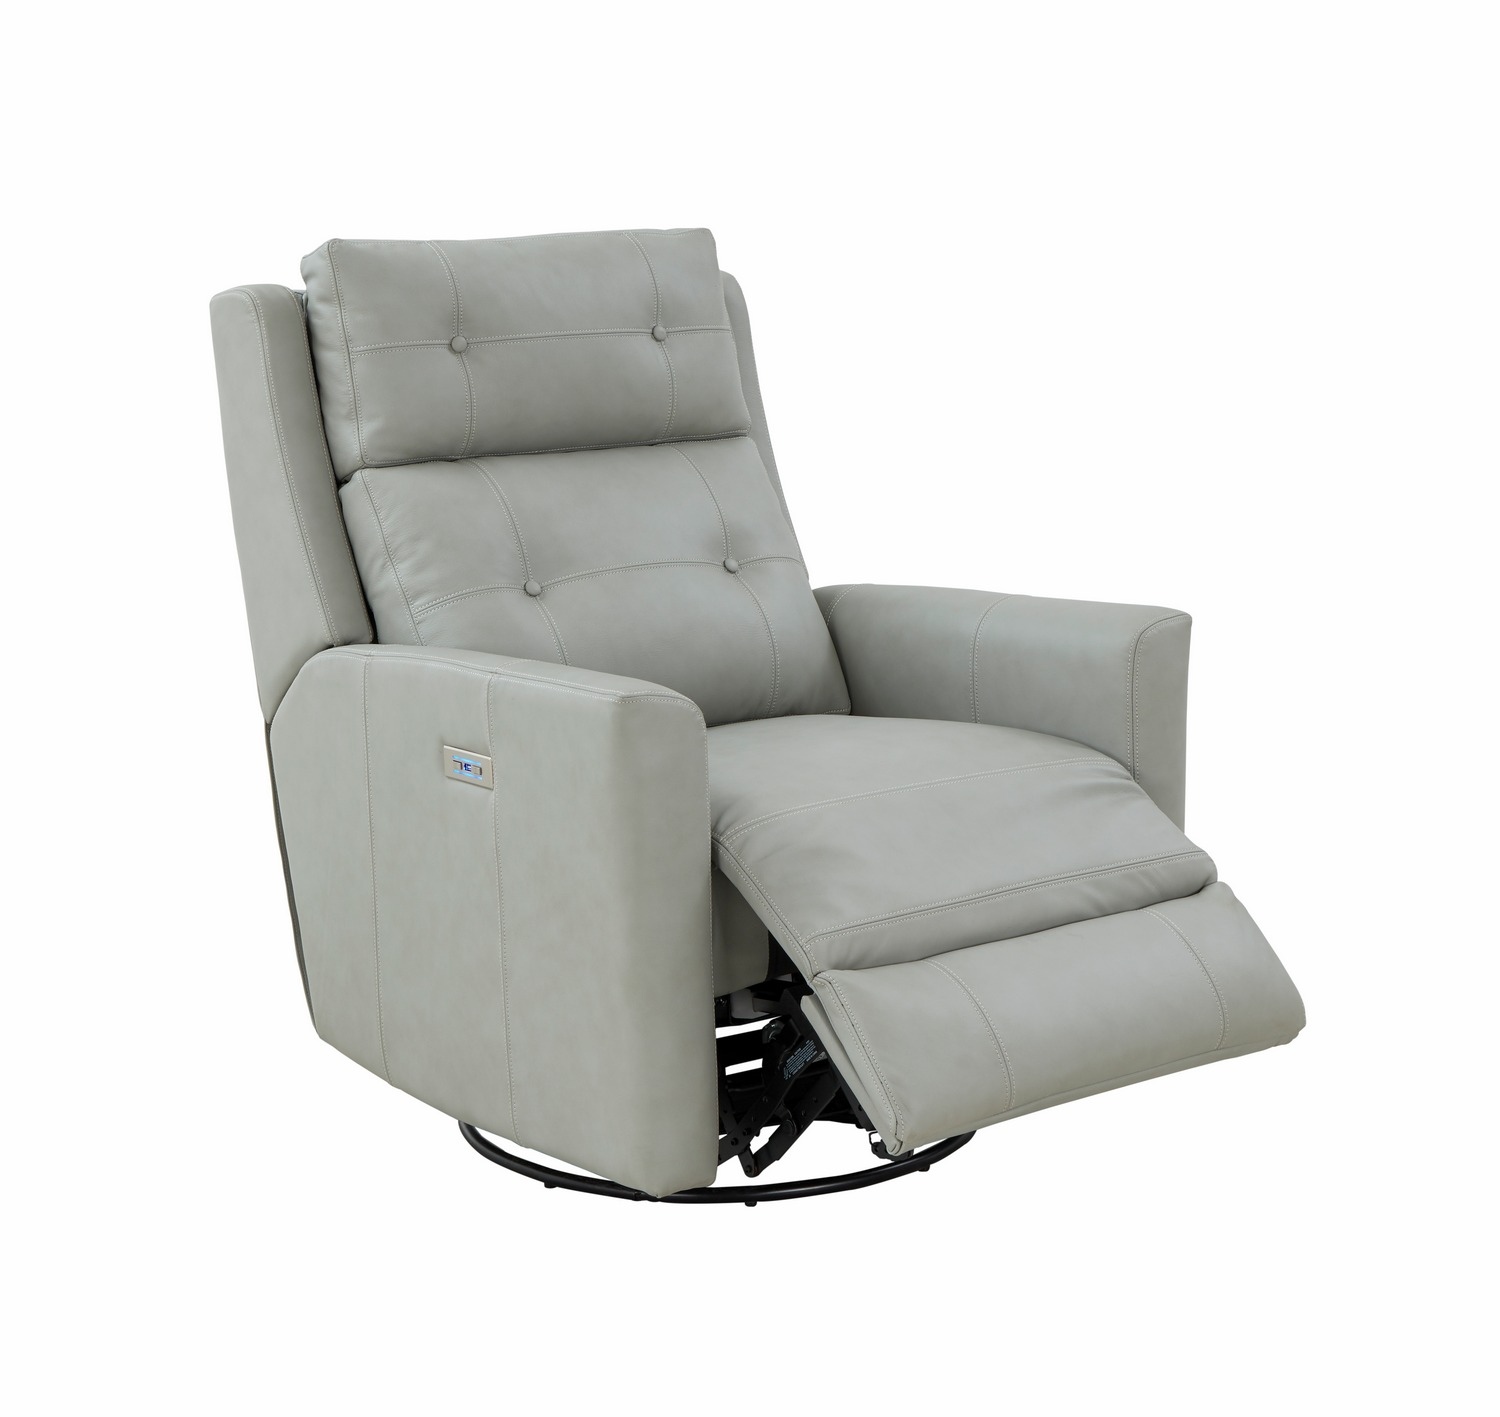 Barcalounger Marconi Power Swivel Glider Recliner Chair with Power Head Rest - Corbett Chromium/All Leather